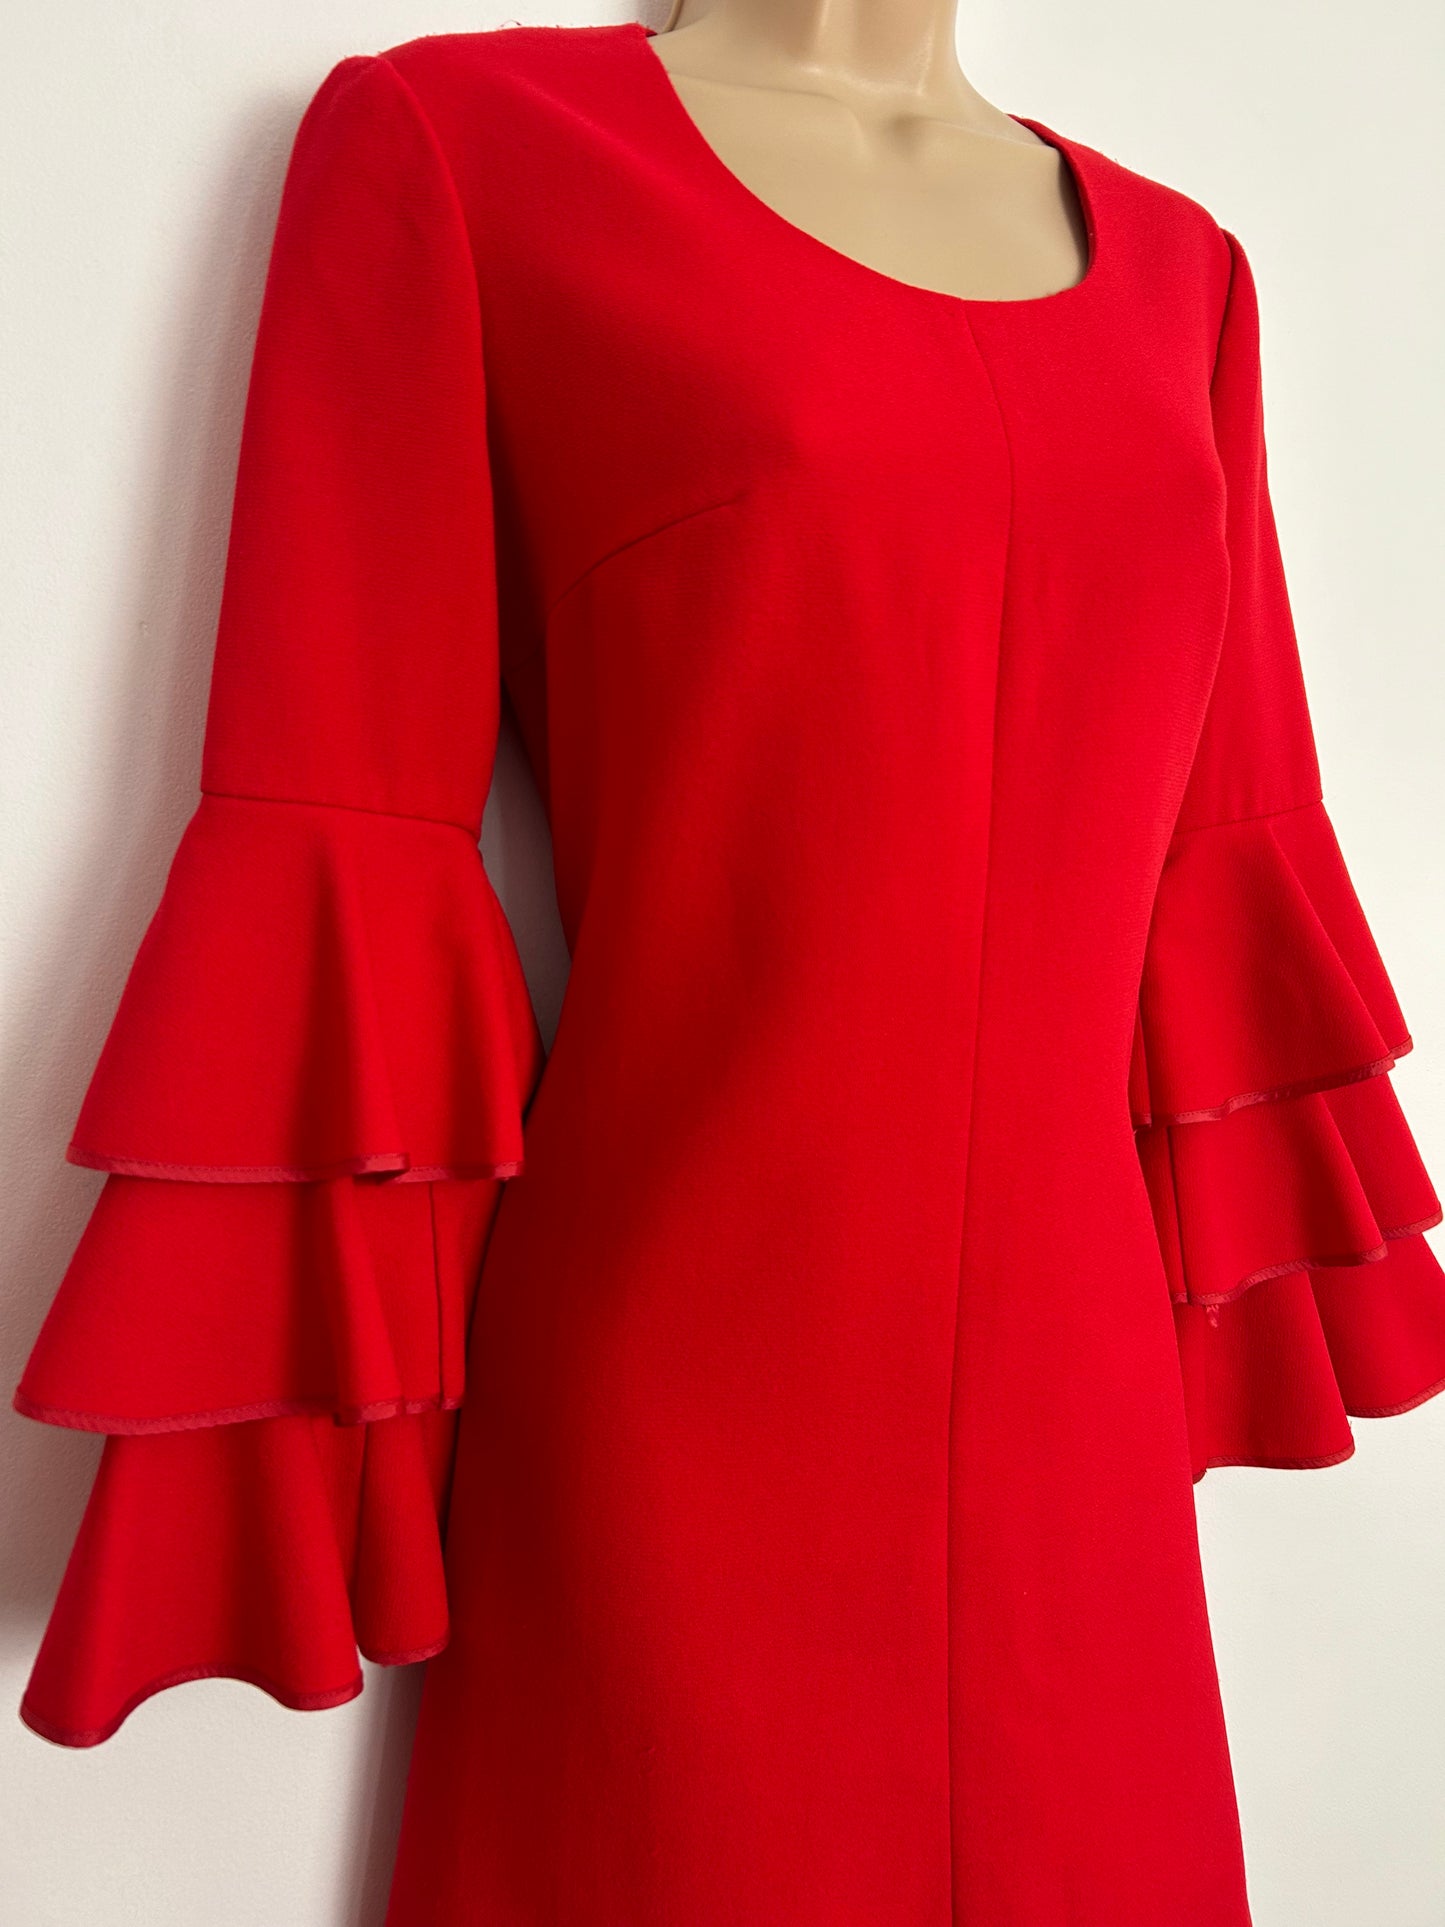 Vintage 1960s Early 1970s UK Size 8 Red Long Layered Sleeve Mini Mod Shift Dress